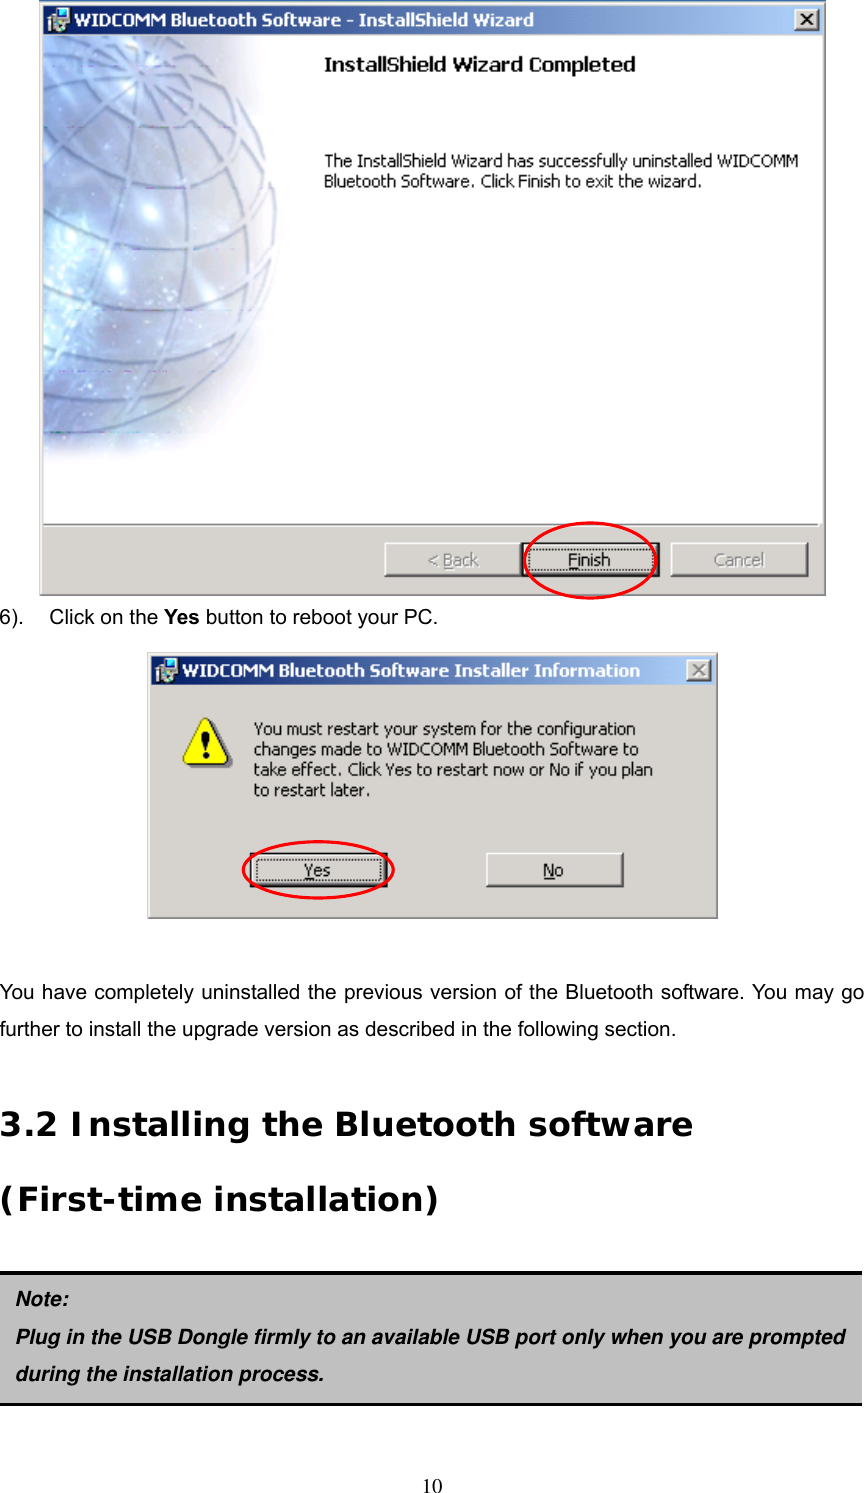  6).  Click on the Yes button to reboot your PC.   You have completely uninstalled the previous version of the Bluetooth software. You may go further to install the upgrade version as described in the following section.  3.2 Installing the Bluetooth software (First-time installation)      Note: Plug in the USB Dongle firmly to an available USB port only whenyou are prompted during the installation process.  10 